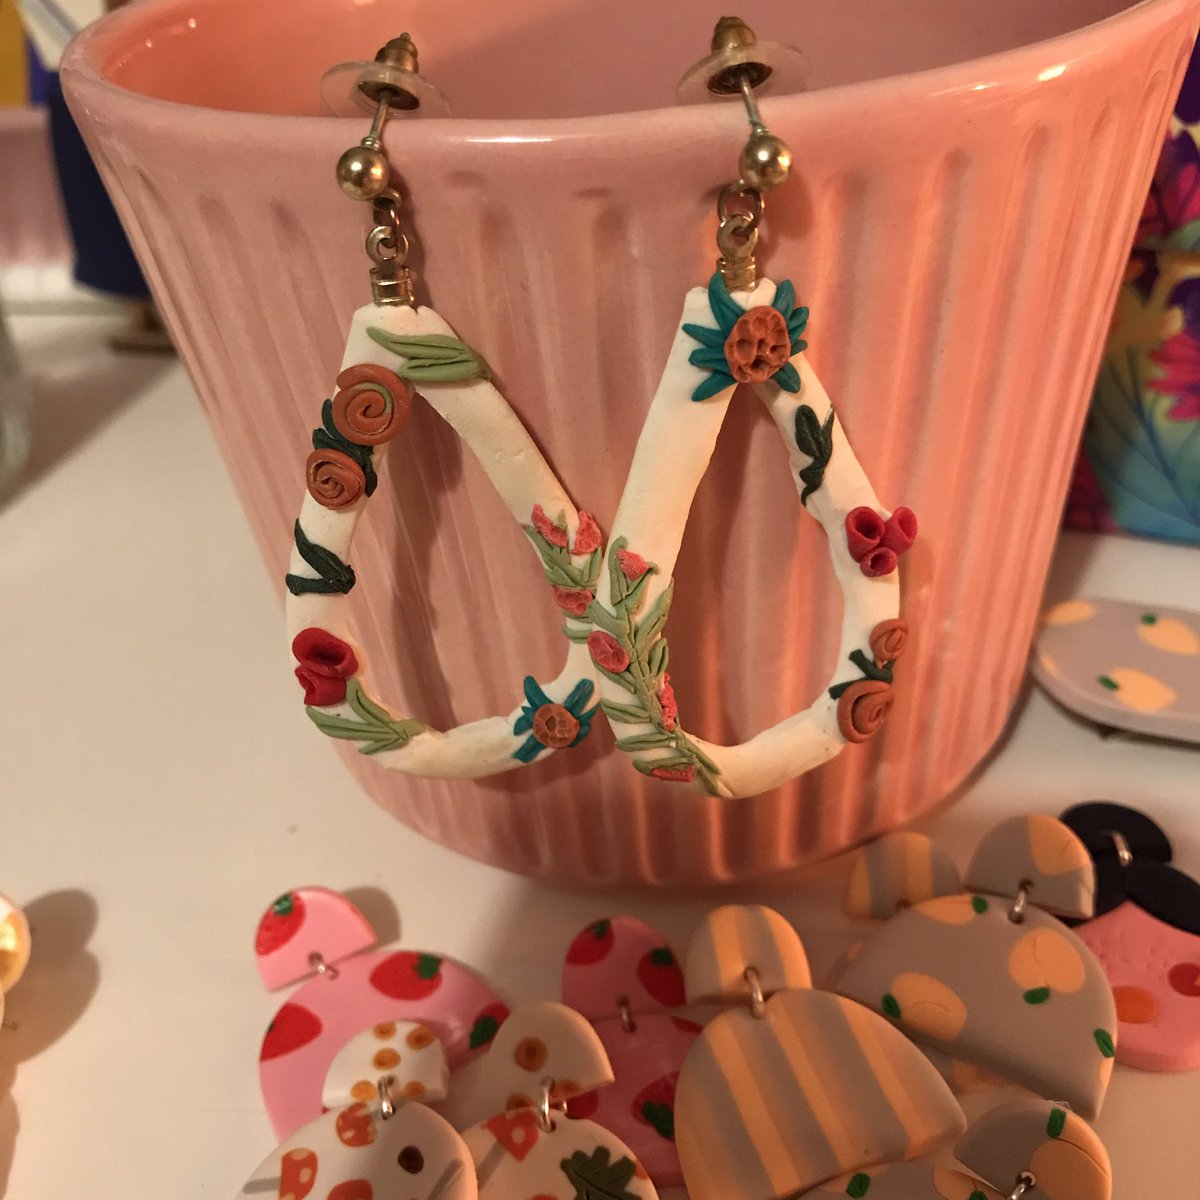 These dangles got me through my first public poetry reading! Velvet Orange Designs is an amazing brand, Aliza is absolutely lovely & so kind. I’ve followed her brand since the start and watching her grow has been amazing, her stock is gorj!  http://velvetorangedesigns.etsy.com 